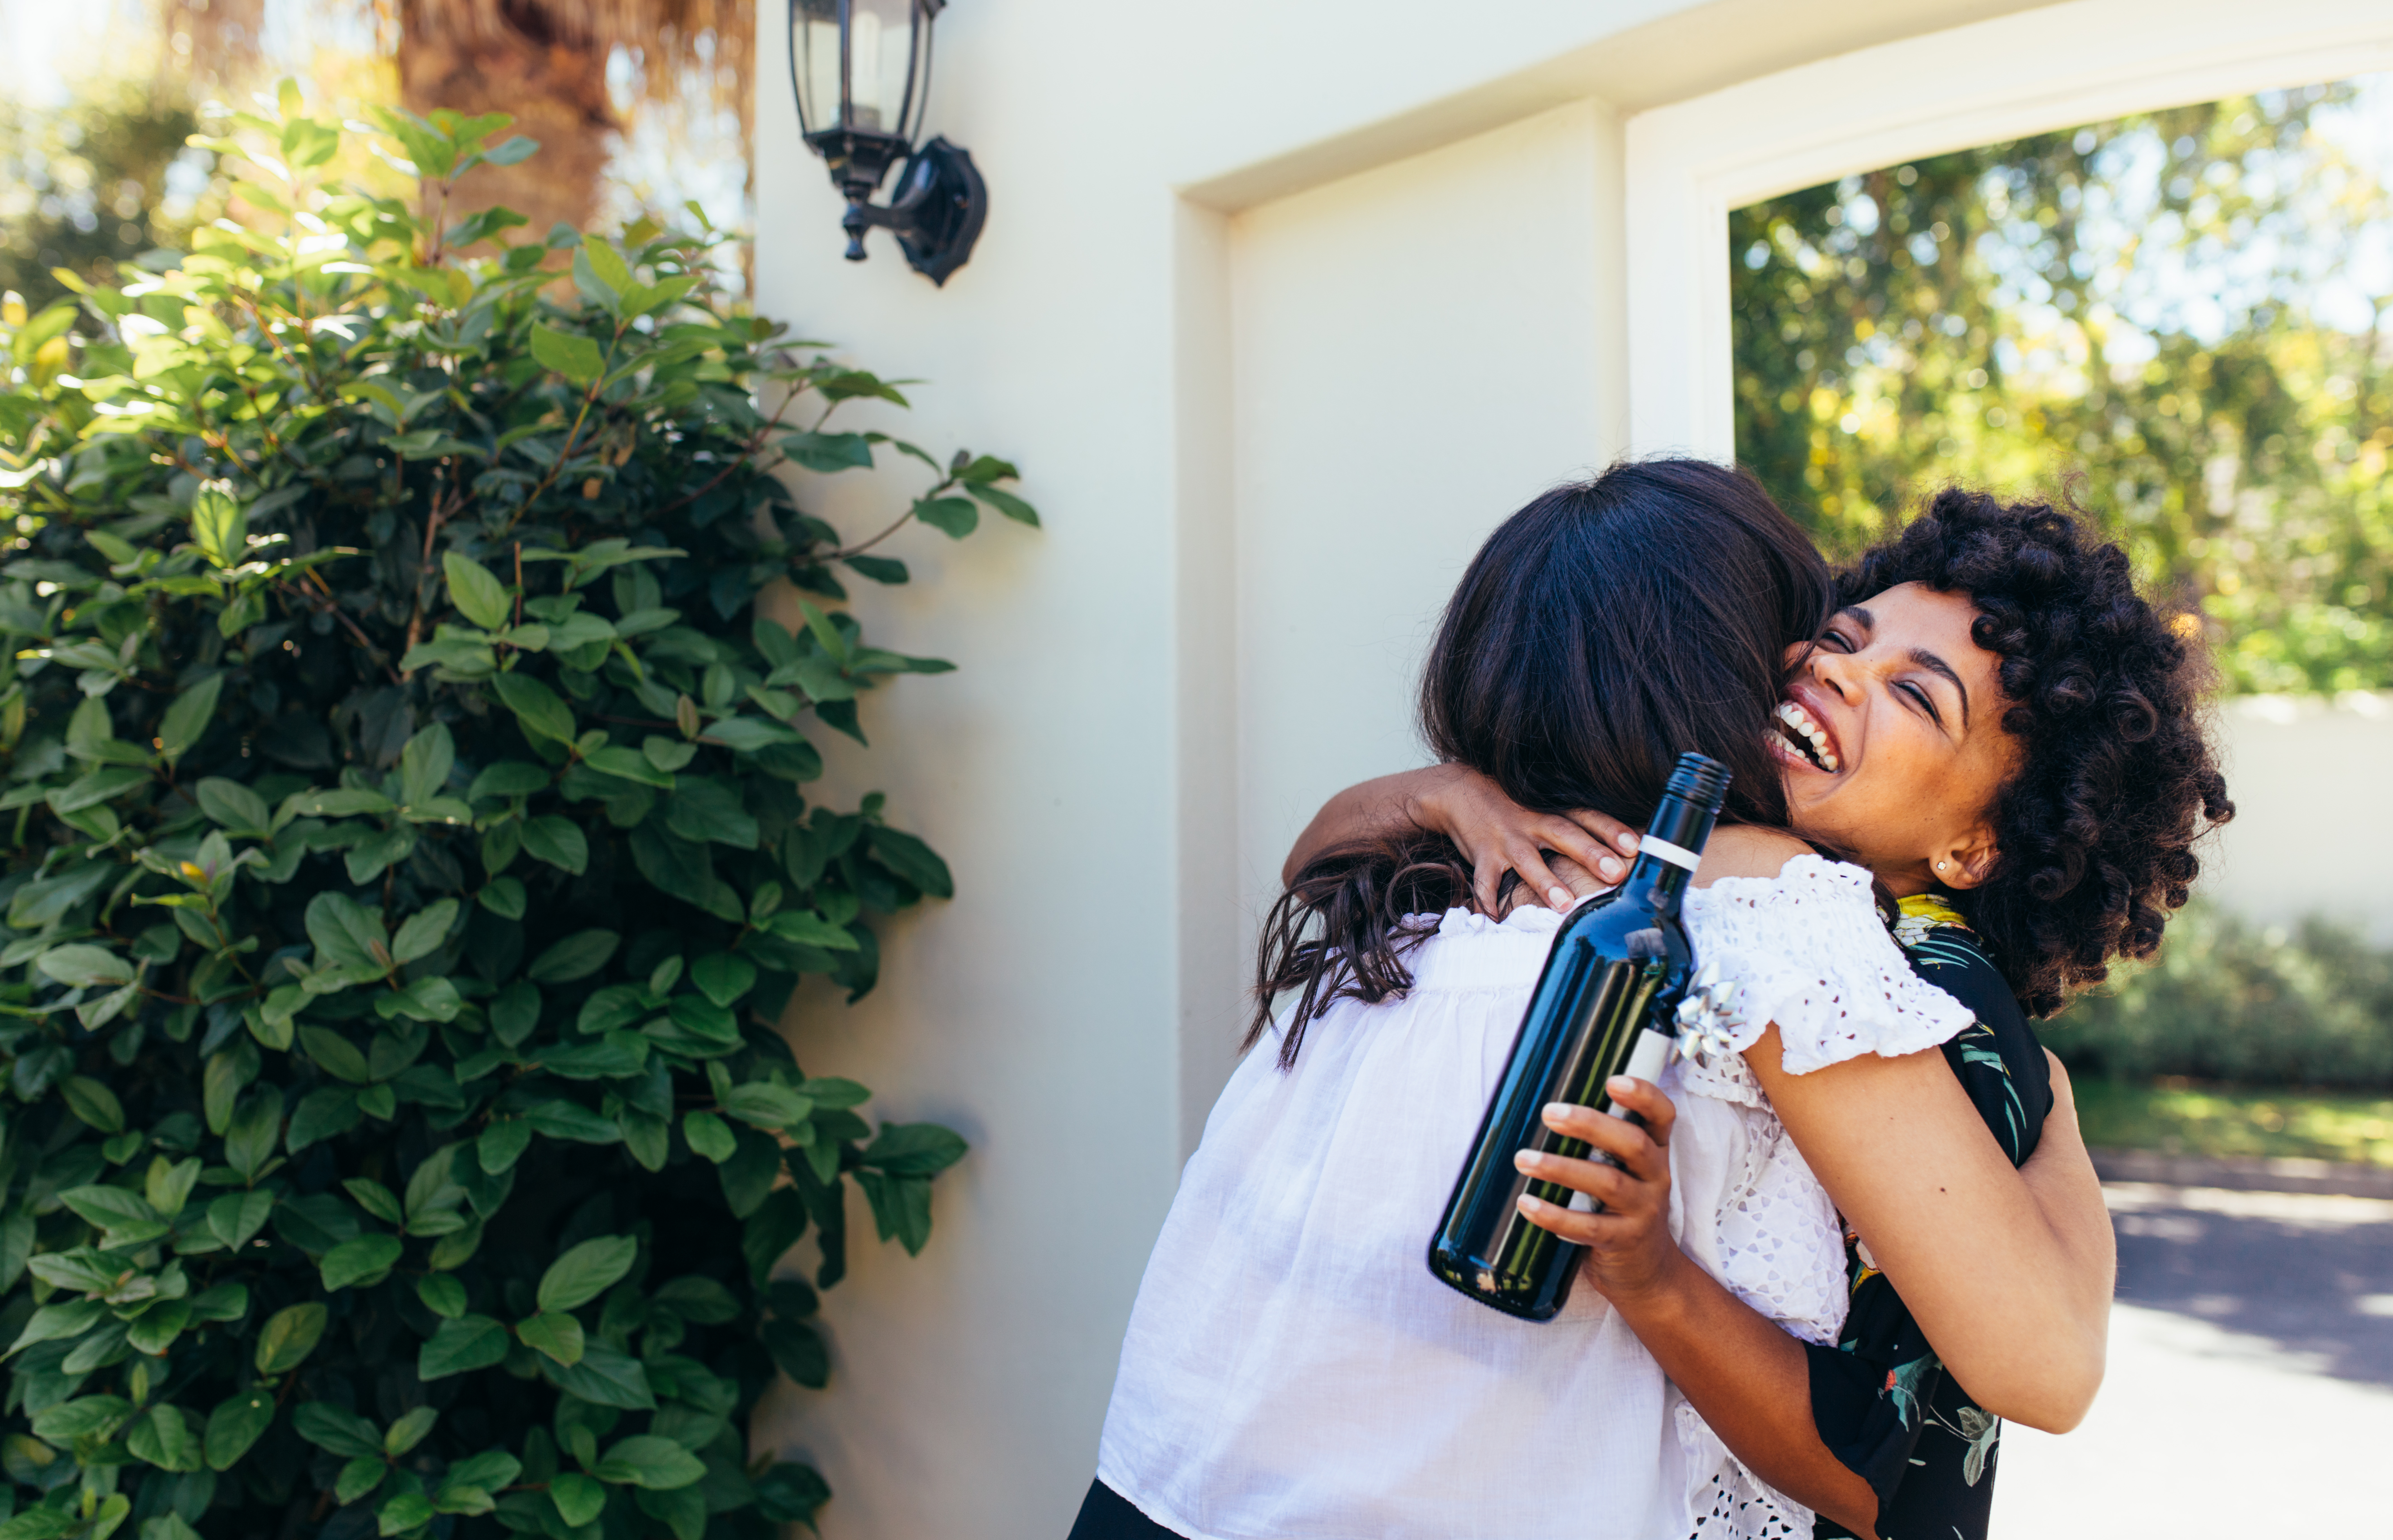 African woman greeting and embracing female friend for having a new house. Smiling young woman with wine bottle congratulating her friend. Housewarming with friends.